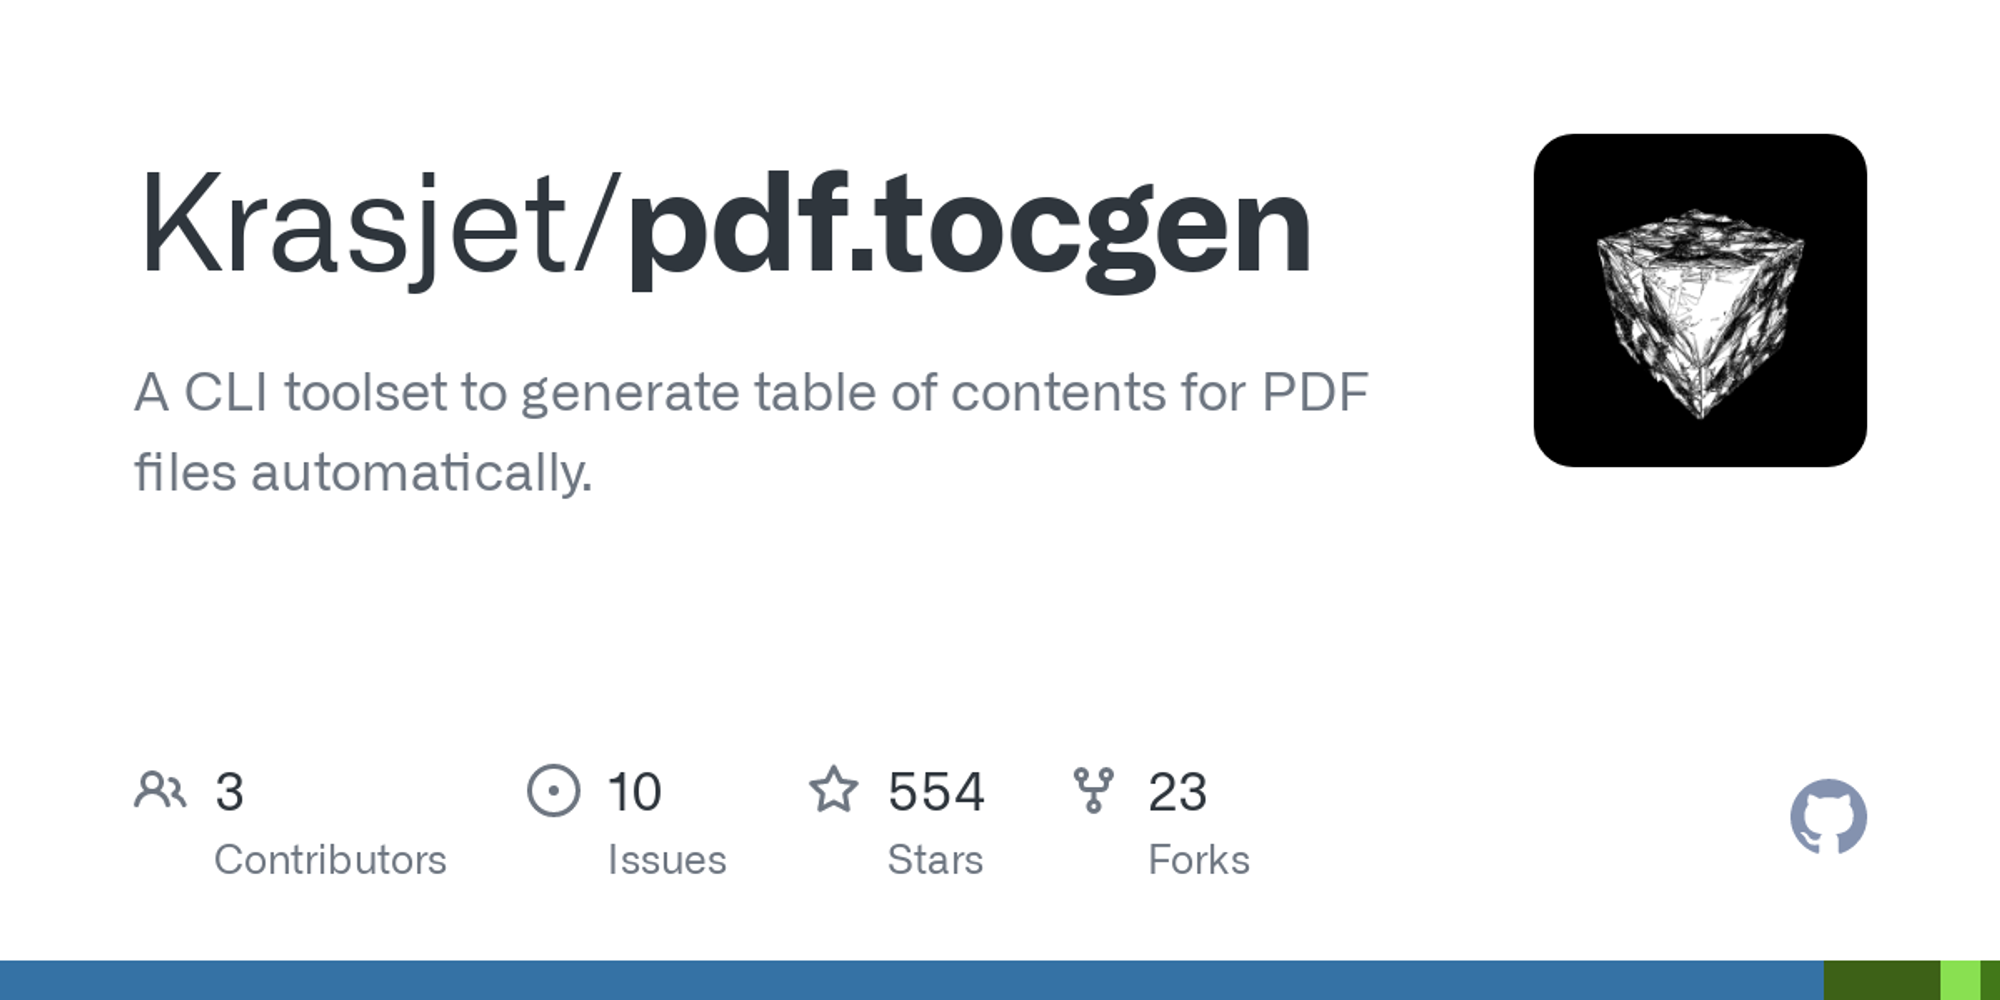 GitHub - Krasjet/pdf.tocgen: A CLI toolset to generate table of contents for PDF files automatically.